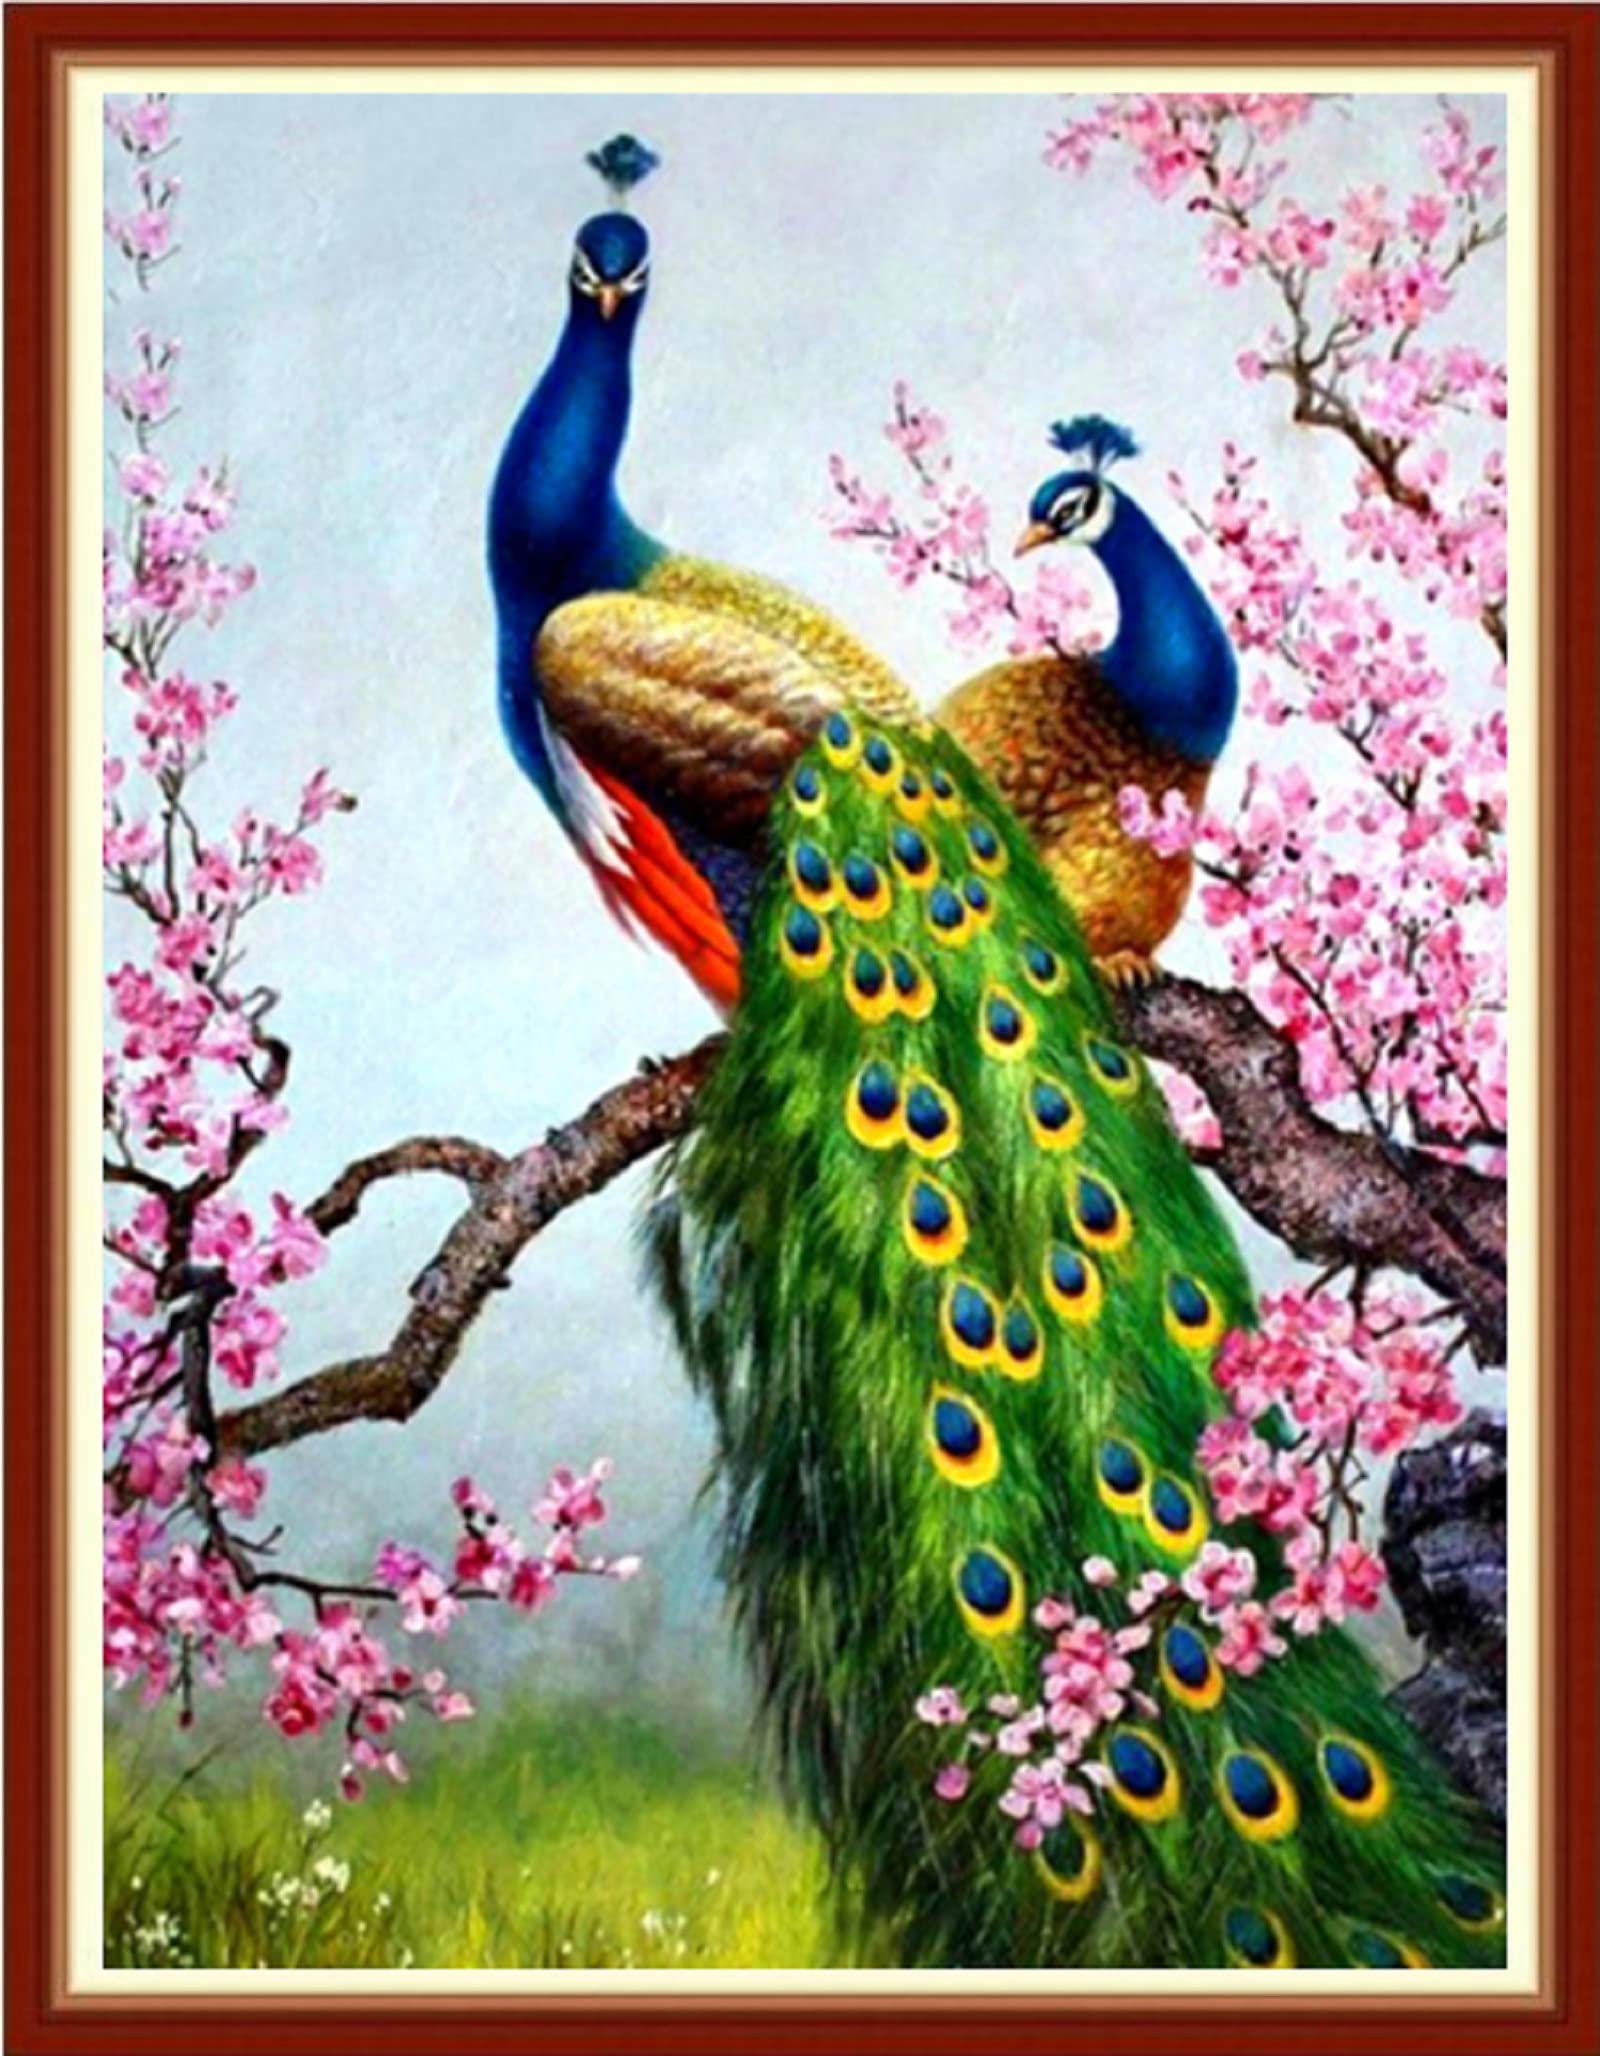 Peacock Stamped Cross Stitch Kits for Adults Beginners, Animals Art DIY  Cross Stitch Patterns Kits Printed Dimensions Needlepoint Kits,Crafts